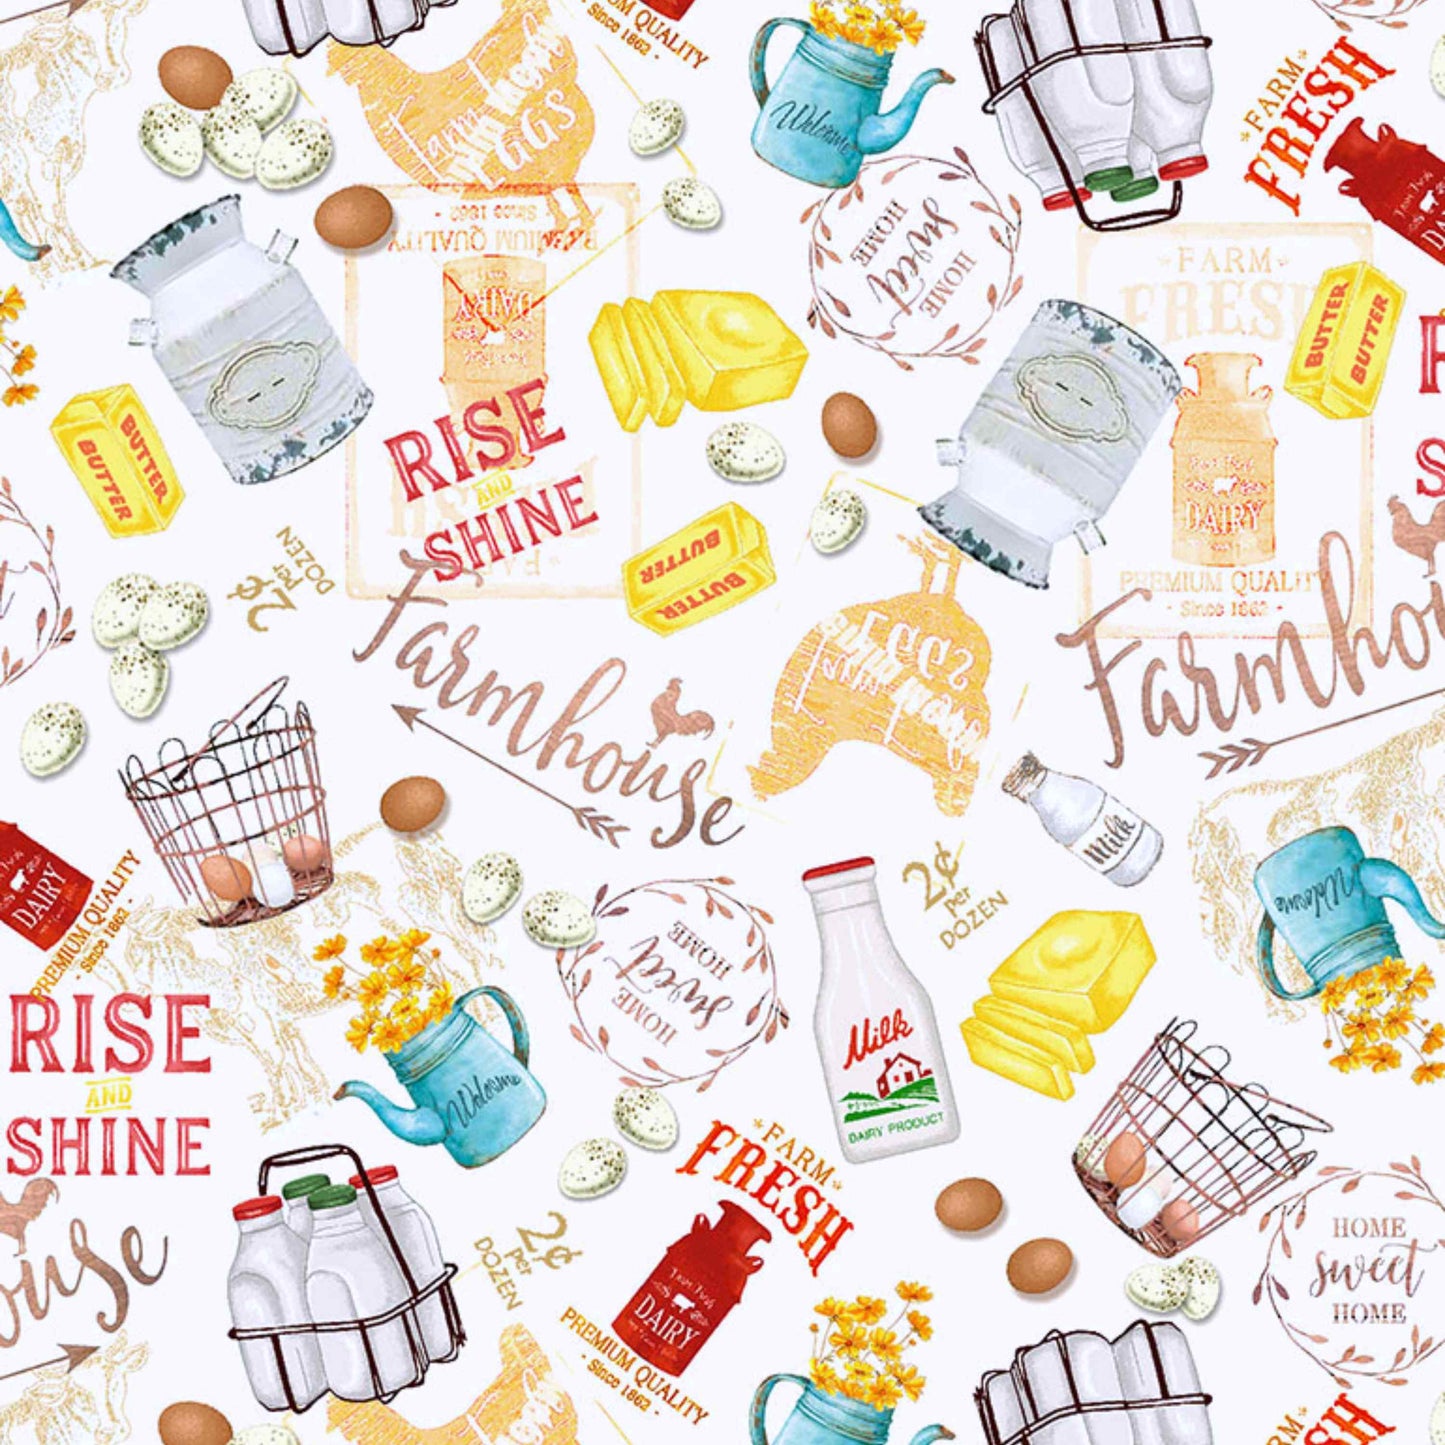 Stand Mixer Slider Mat - Farmhouse Words and Images